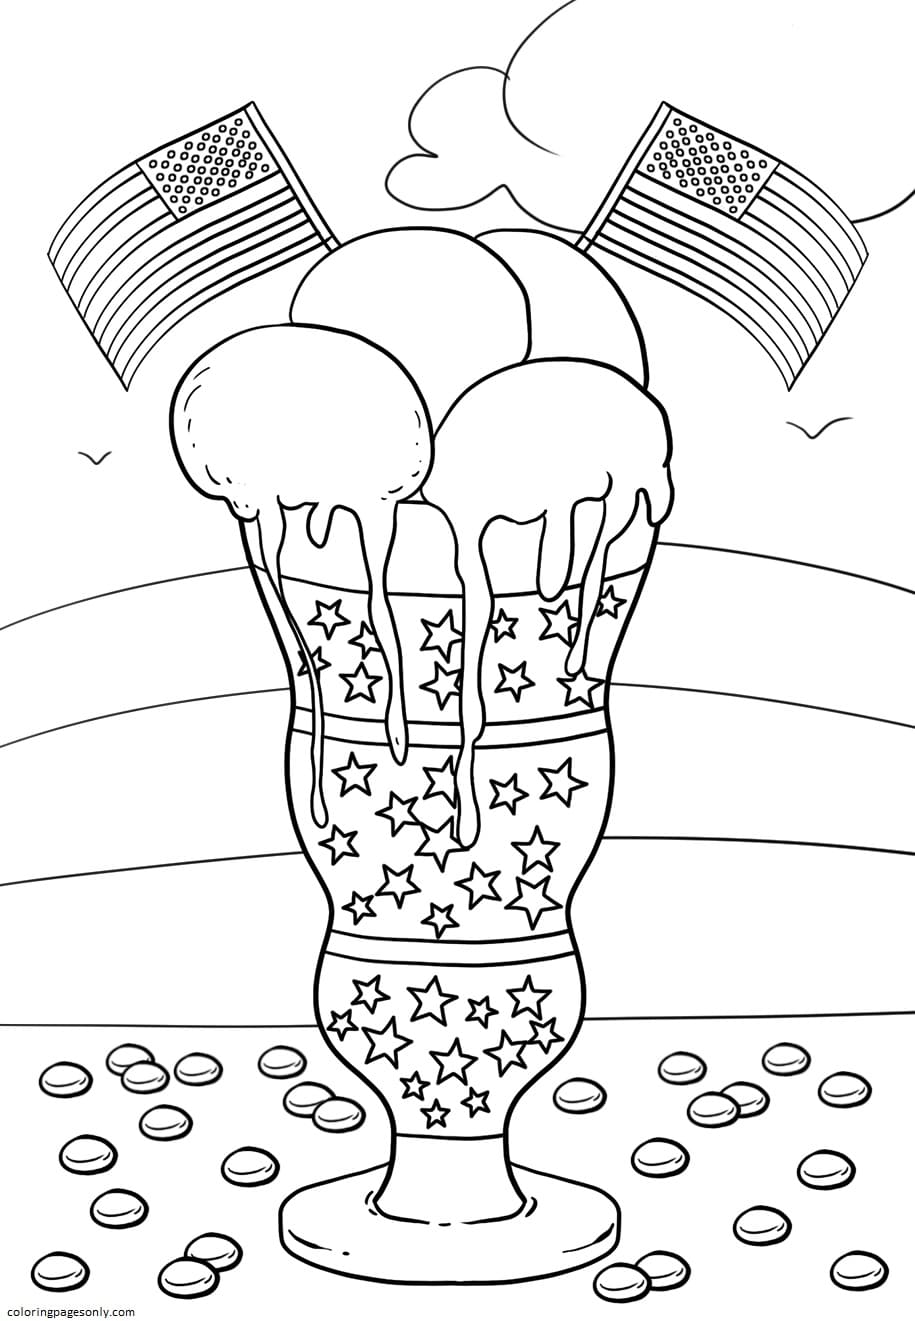 The Happy 4th of July Coloring Pages 4th Of July Coloring Pages